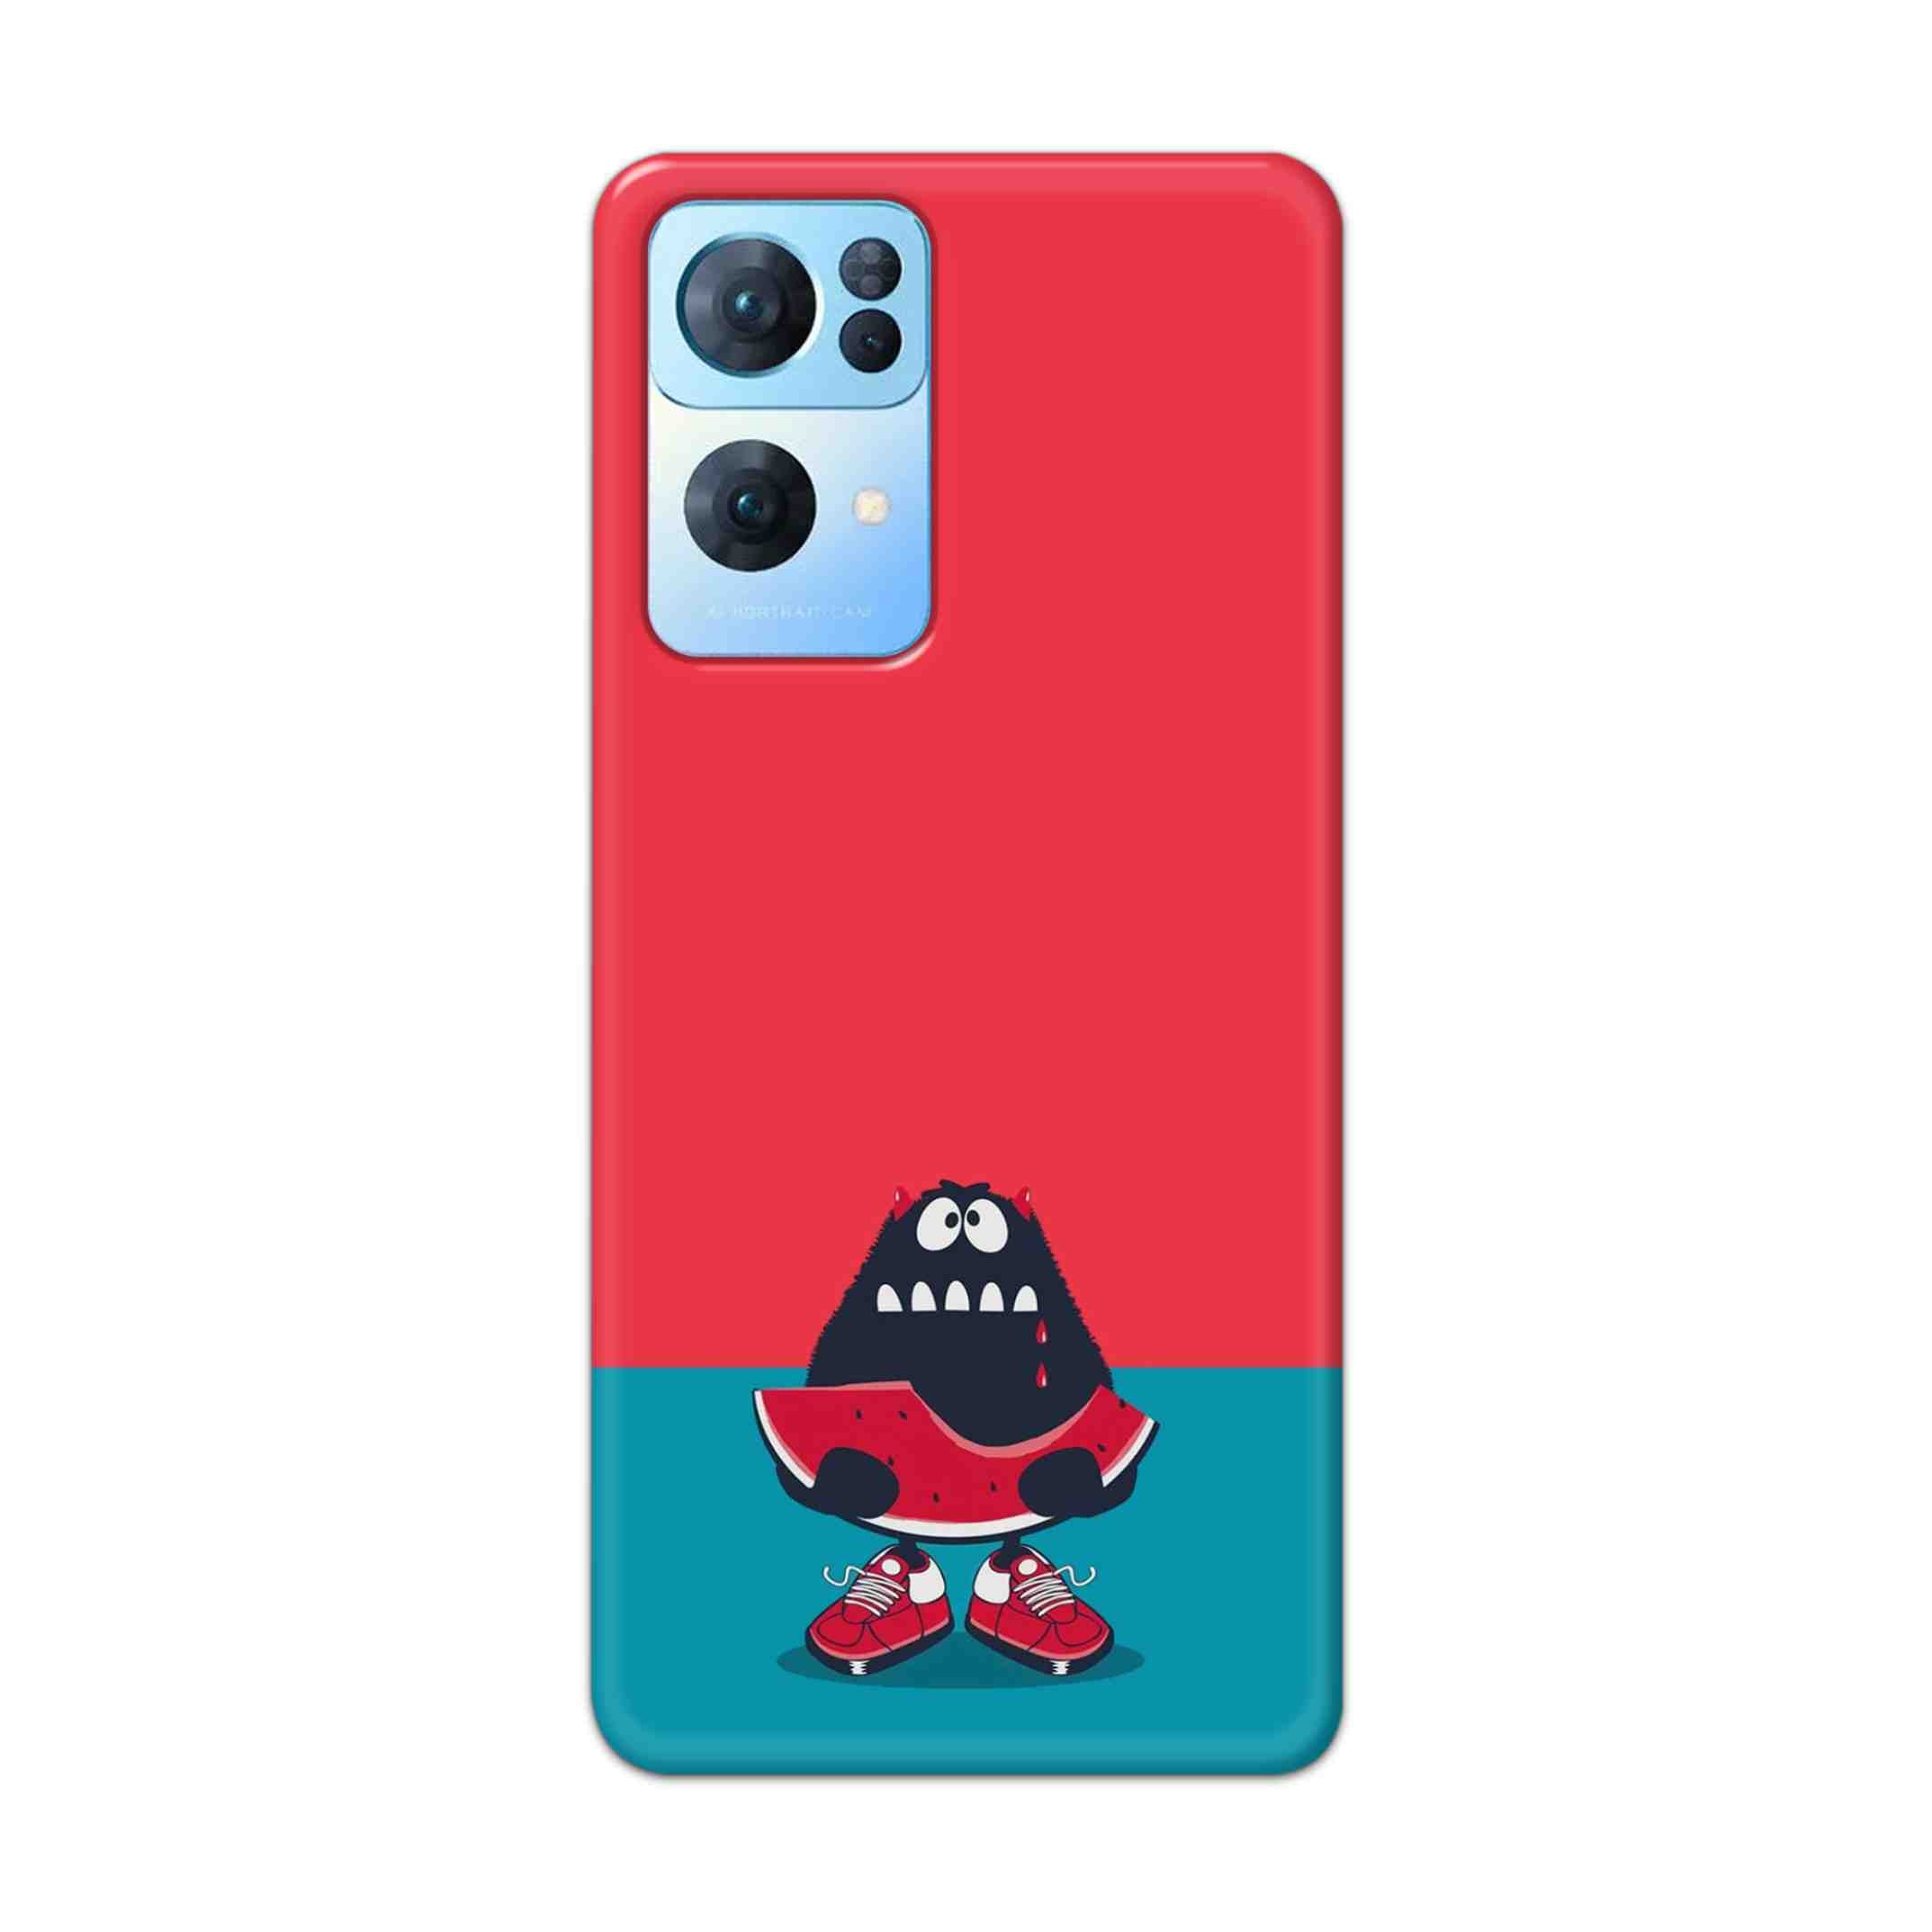 Buy Watermelon Hard Back Mobile Phone Case Cover For Oppo Reno 7 Pro Online